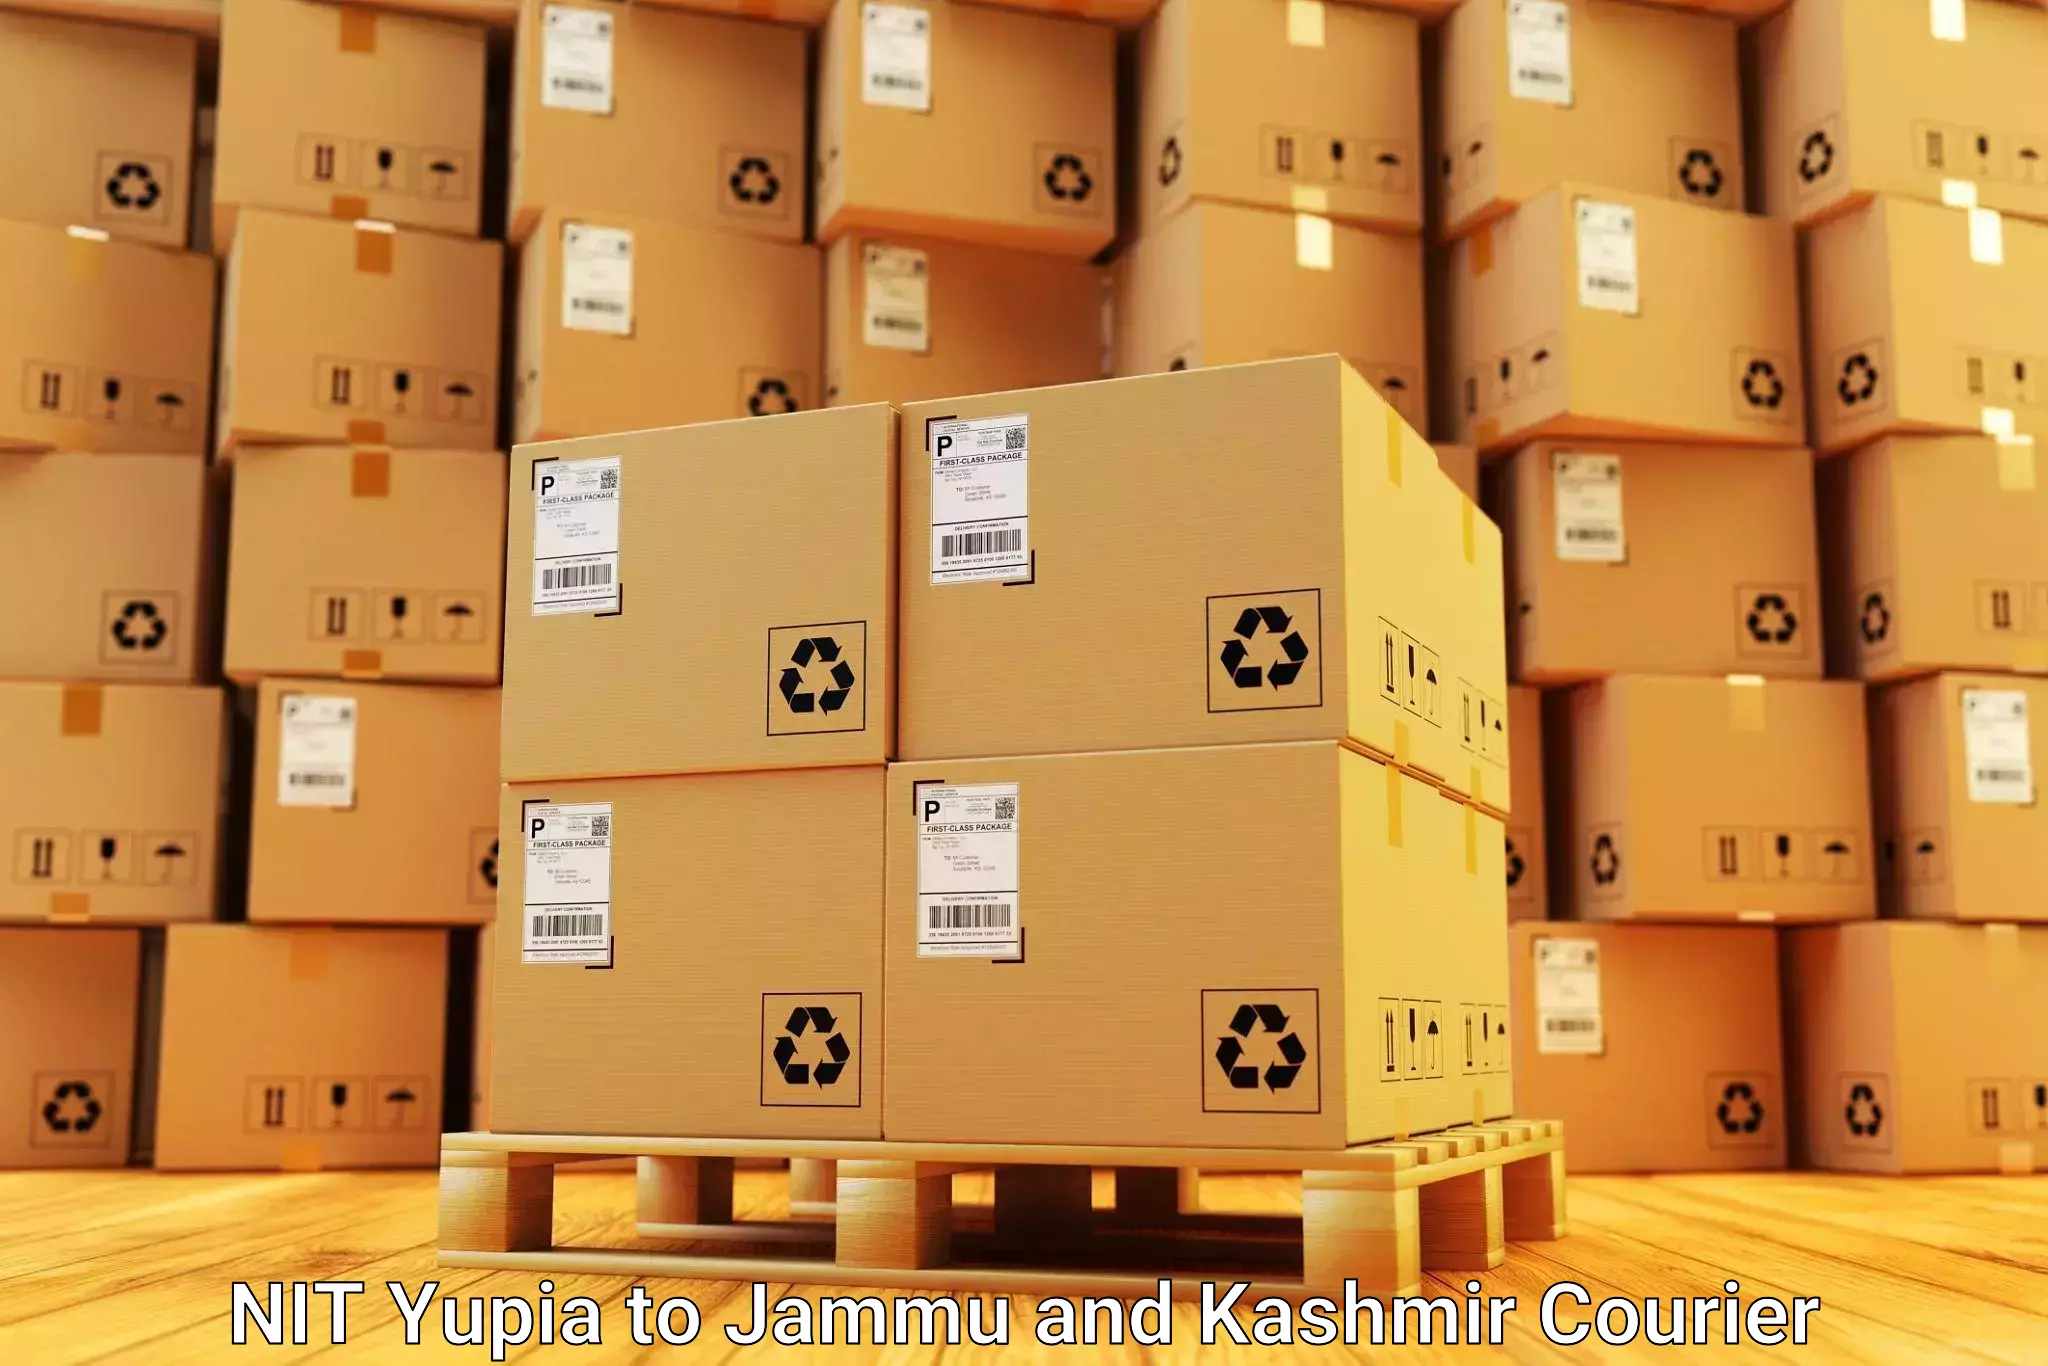 Moving and handling services NIT Yupia to Jammu and Kashmir